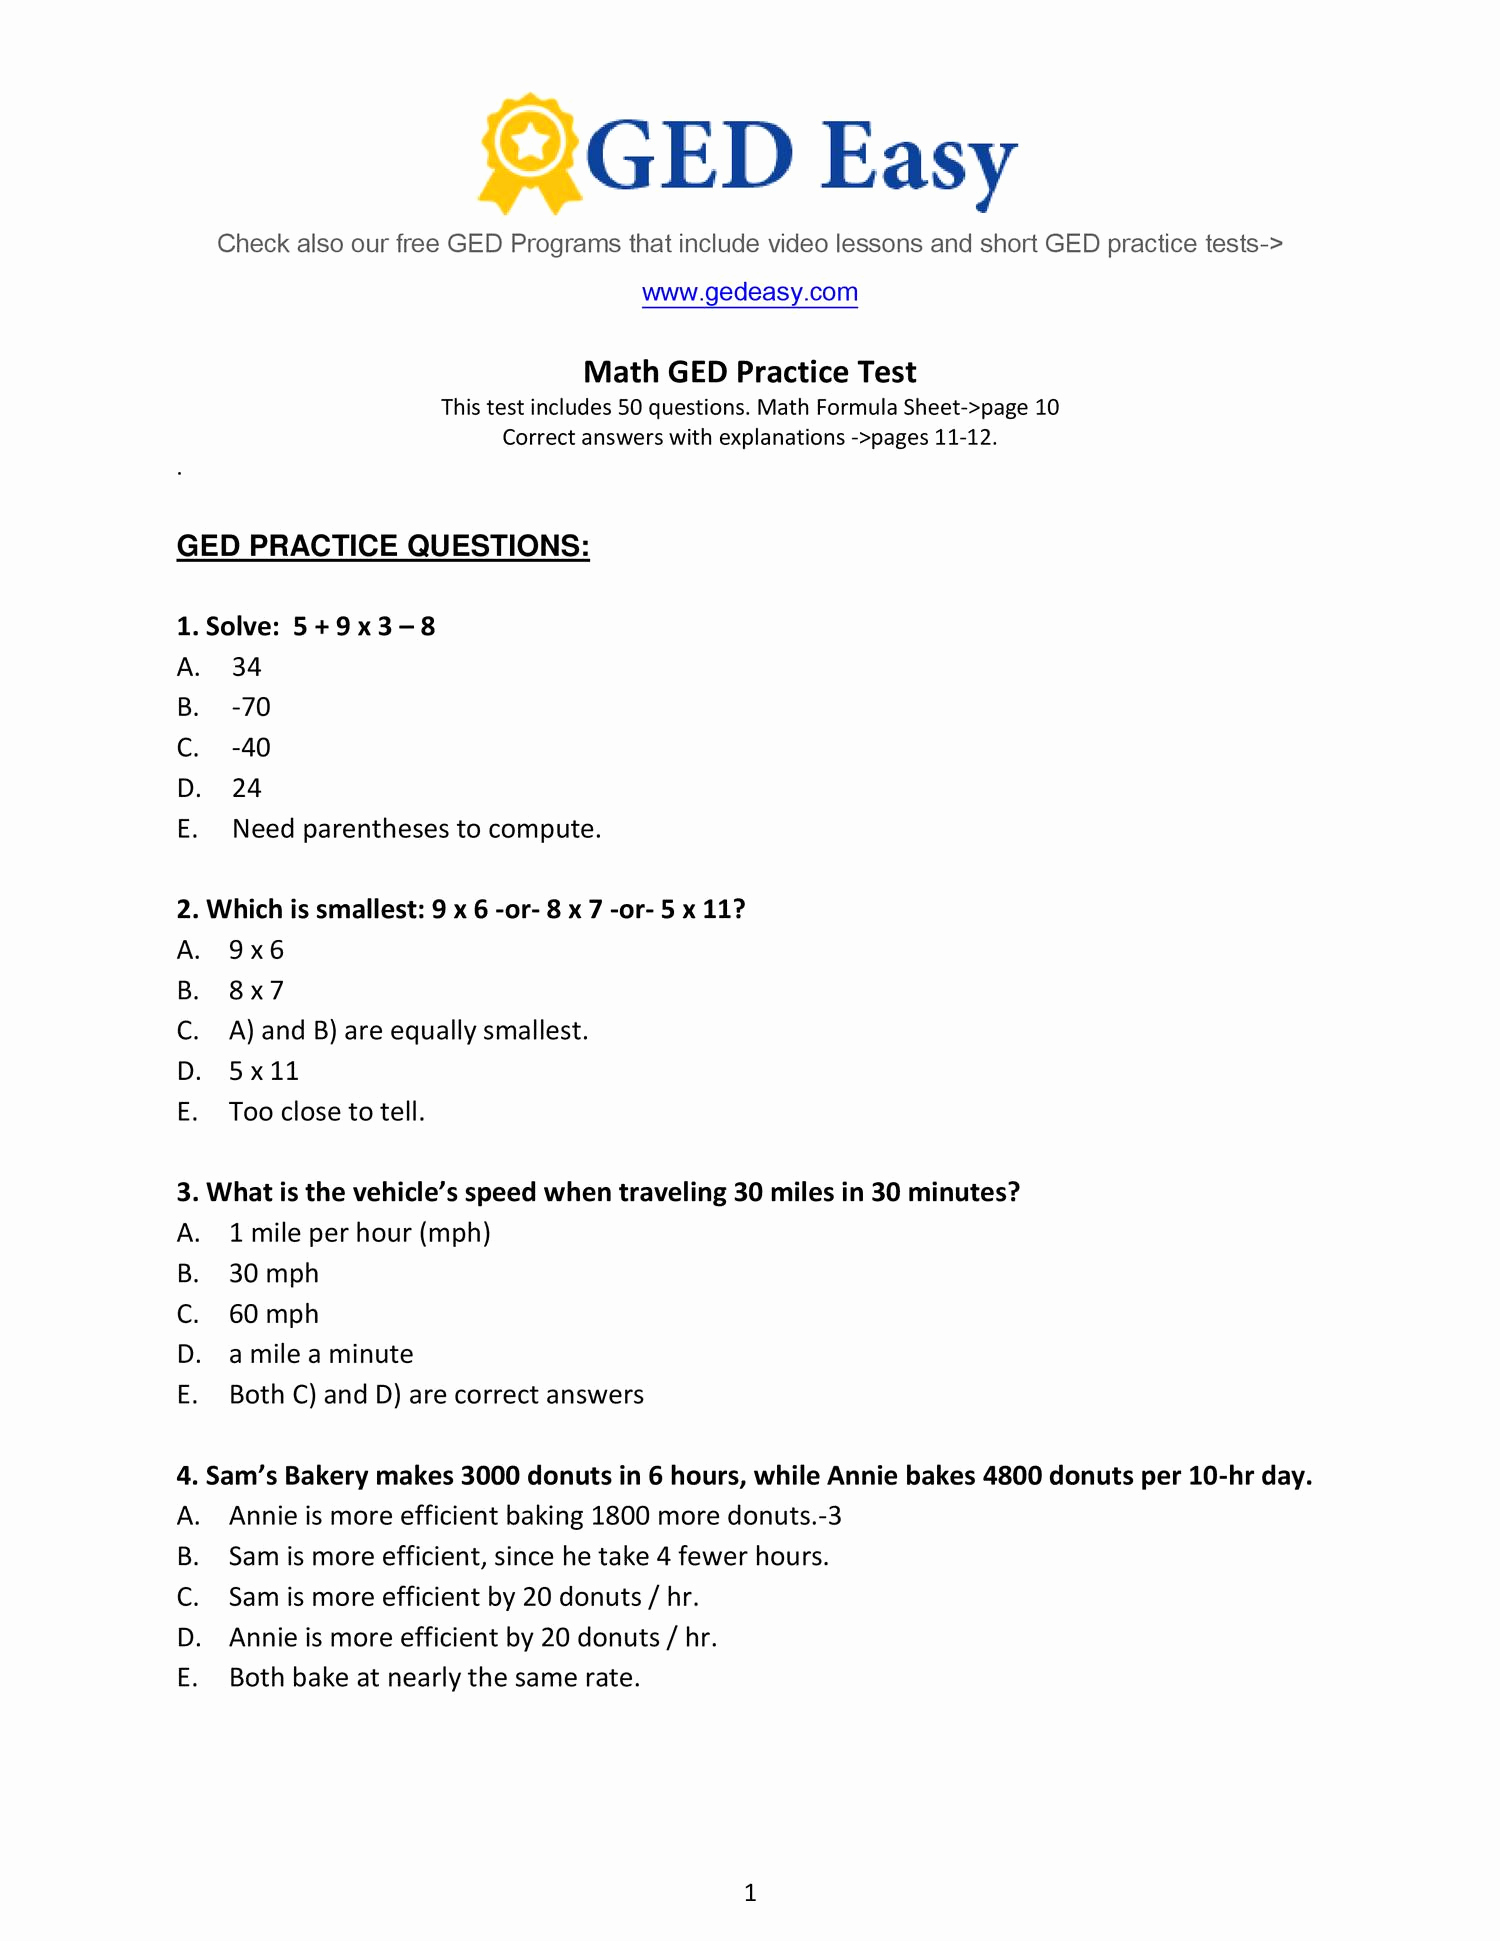 Ged Math Practice Test 2016 Awesome Ged Test Preparation Materials - Free Printable Ged Practice Test With Answer Key 2017